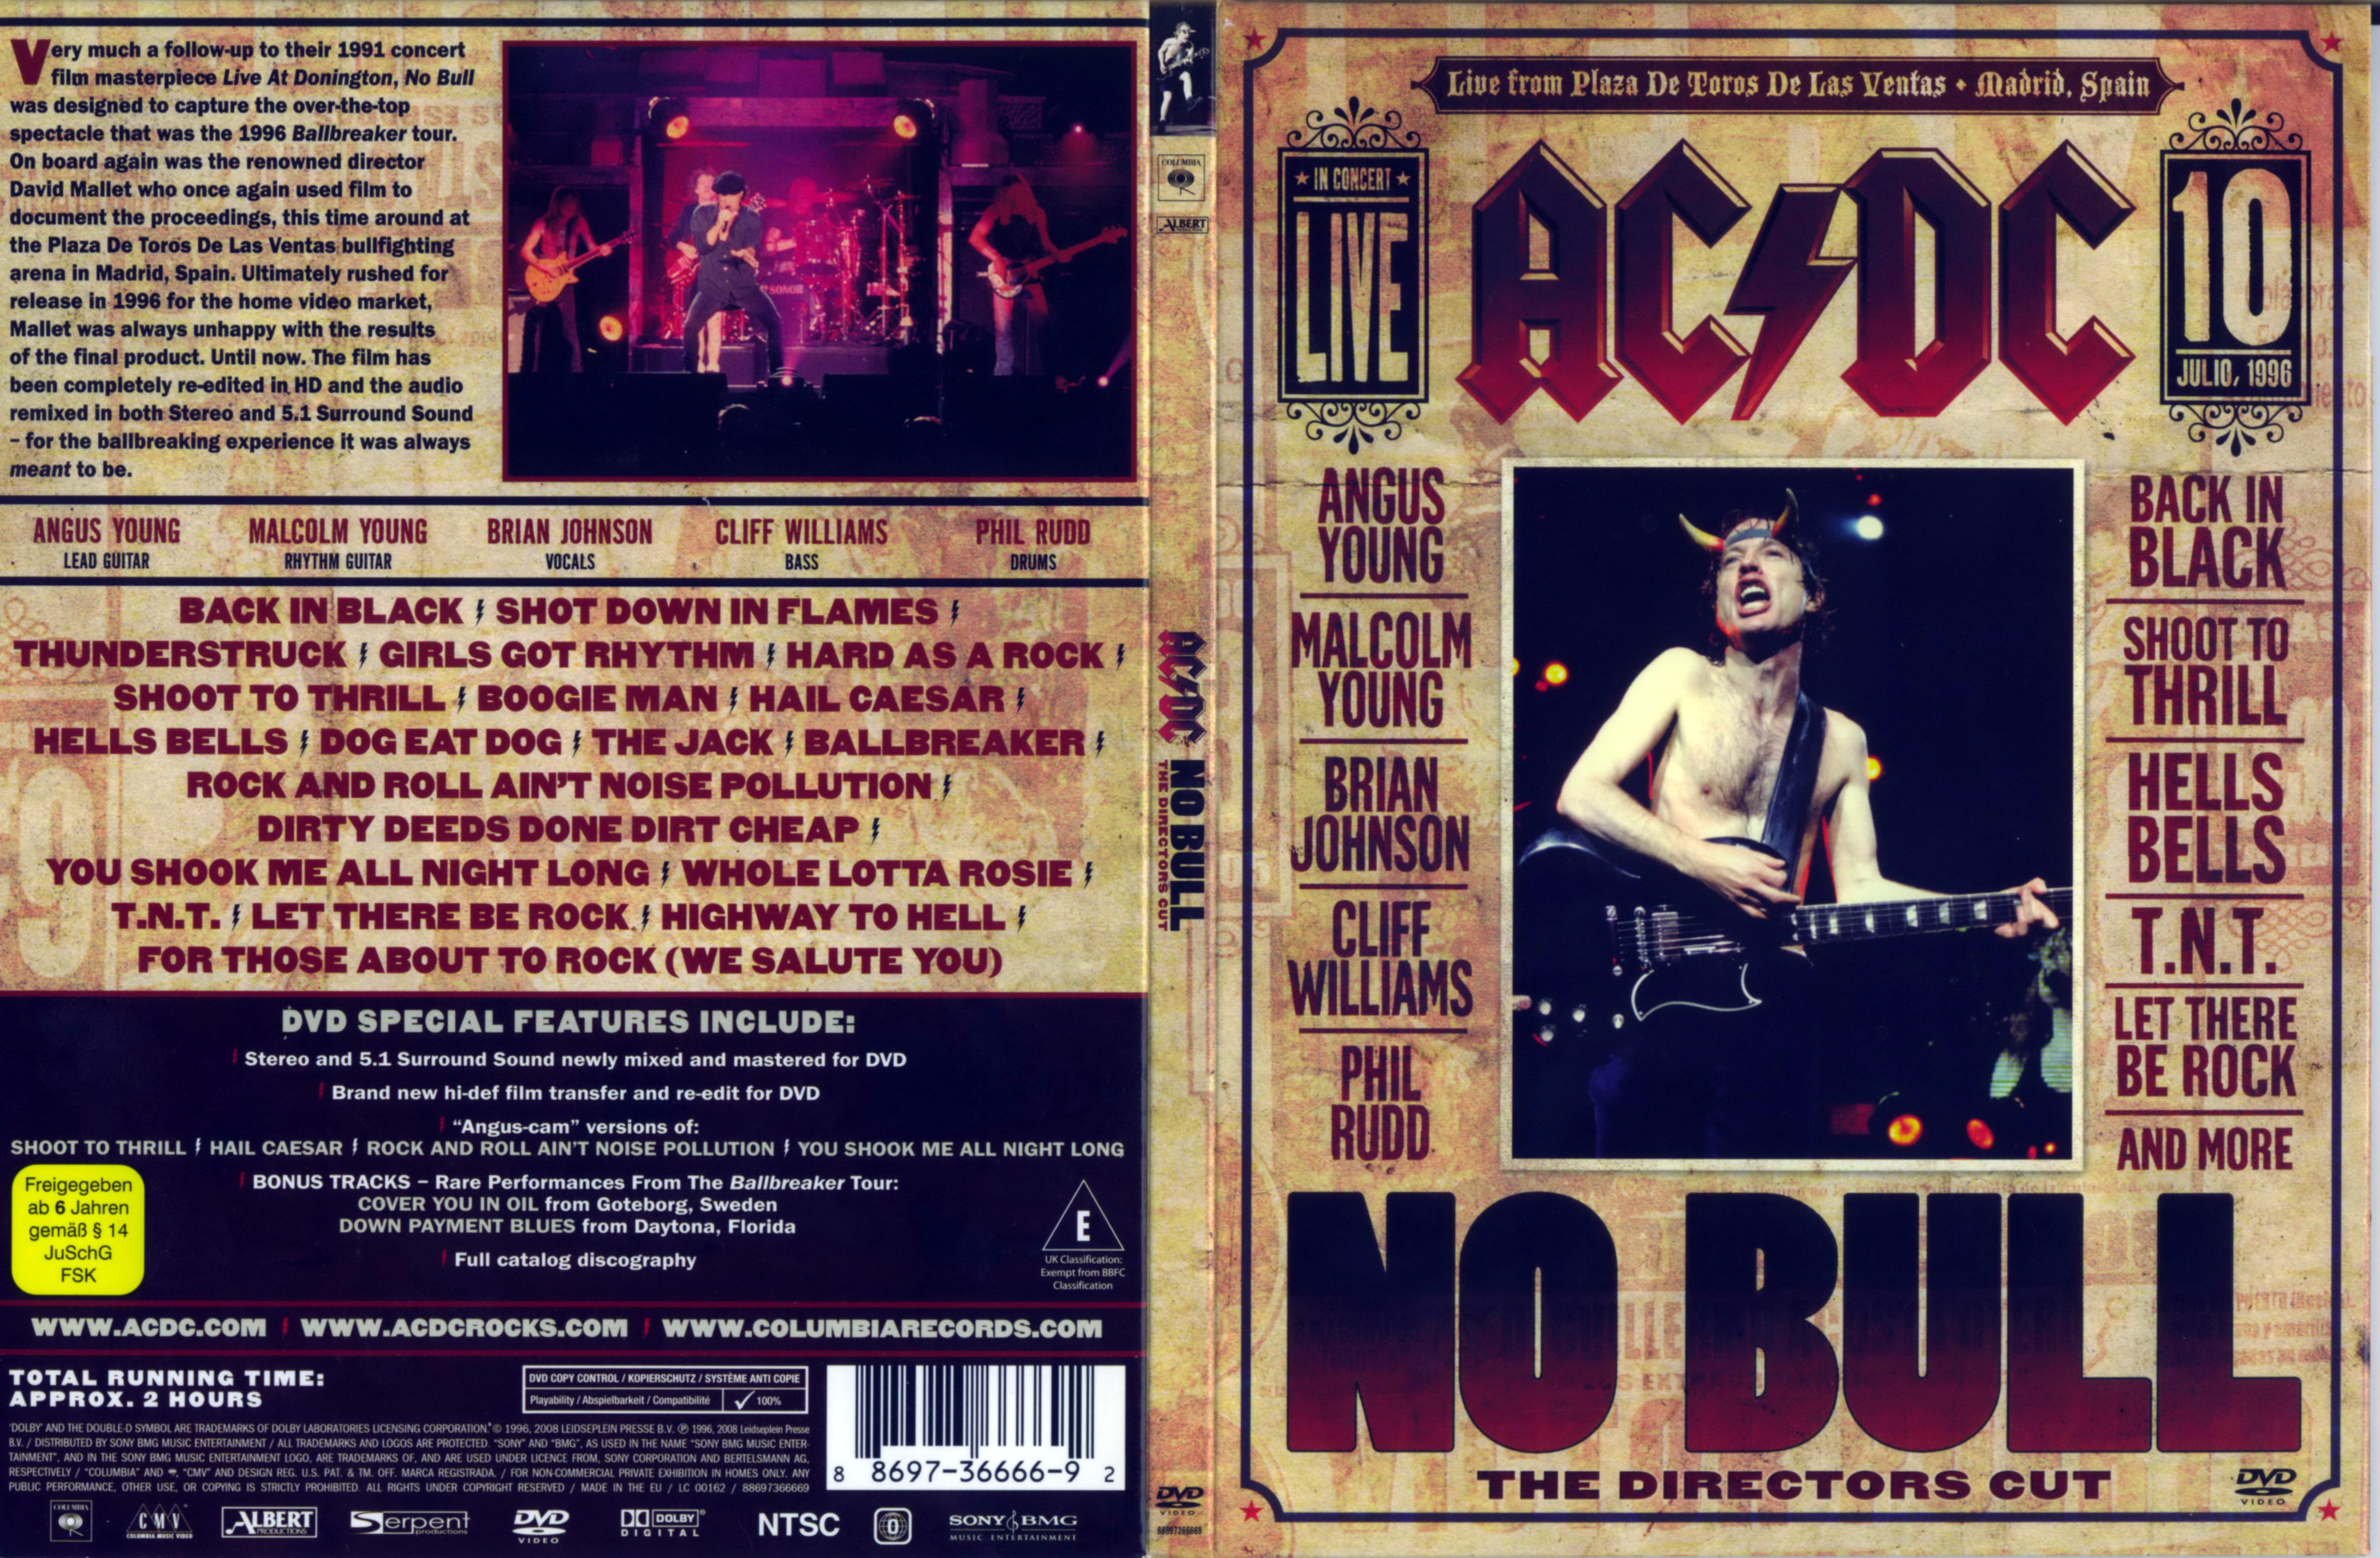 Jaquette DVD ACDC no bull v2